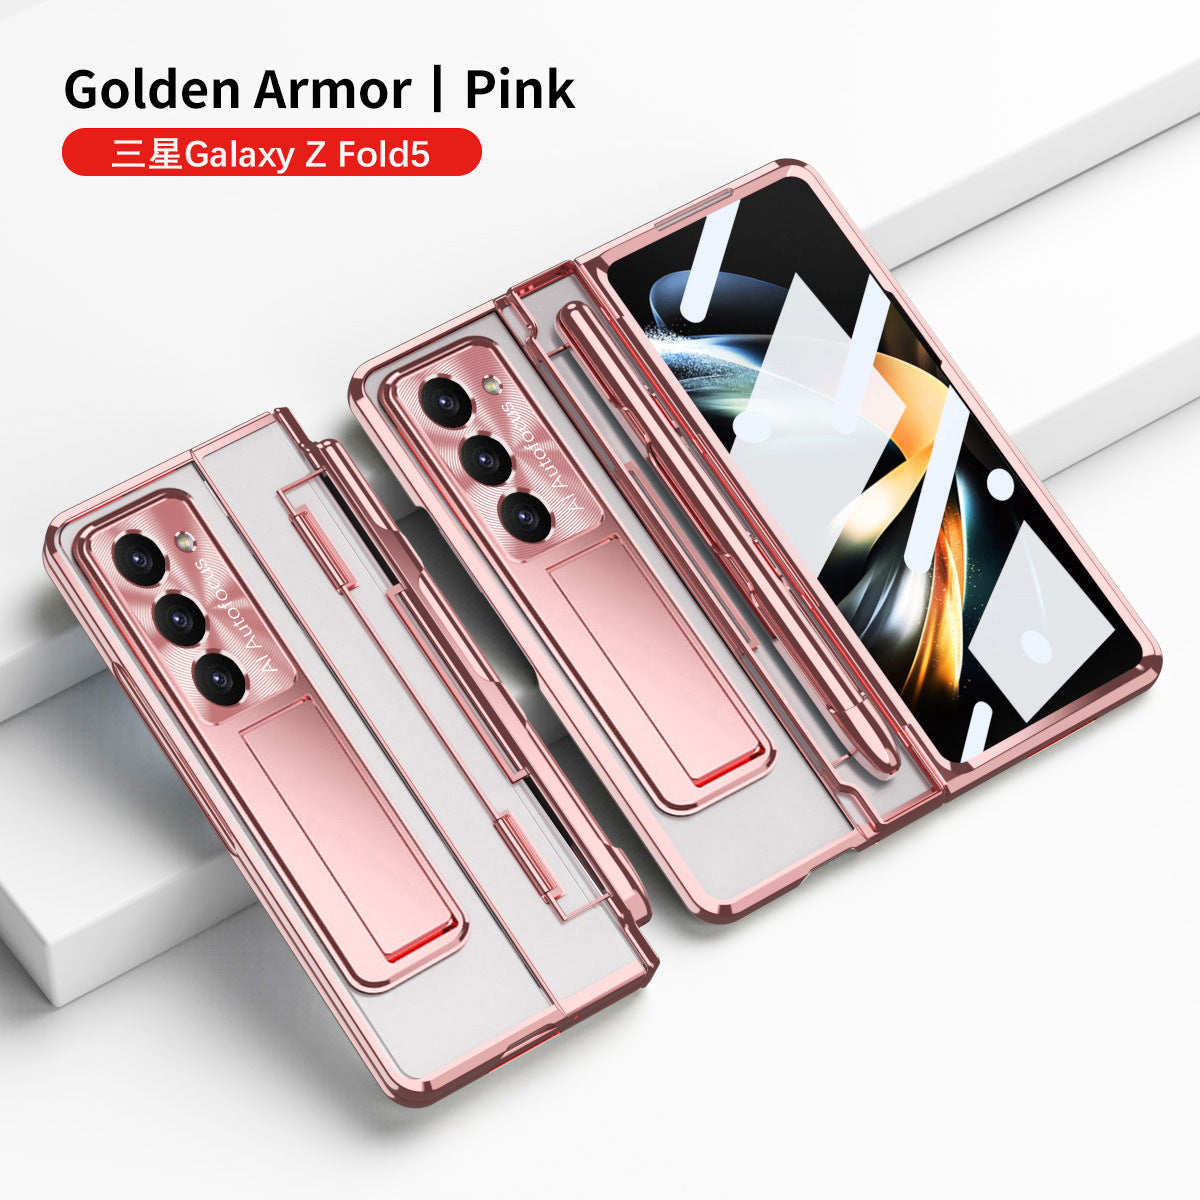 Electroplated Clear PC Galaxy Z Fold5 Case with Front Screen Protector & Flat Hinge & Hidden Stand And Pen Slot and Free Stylus